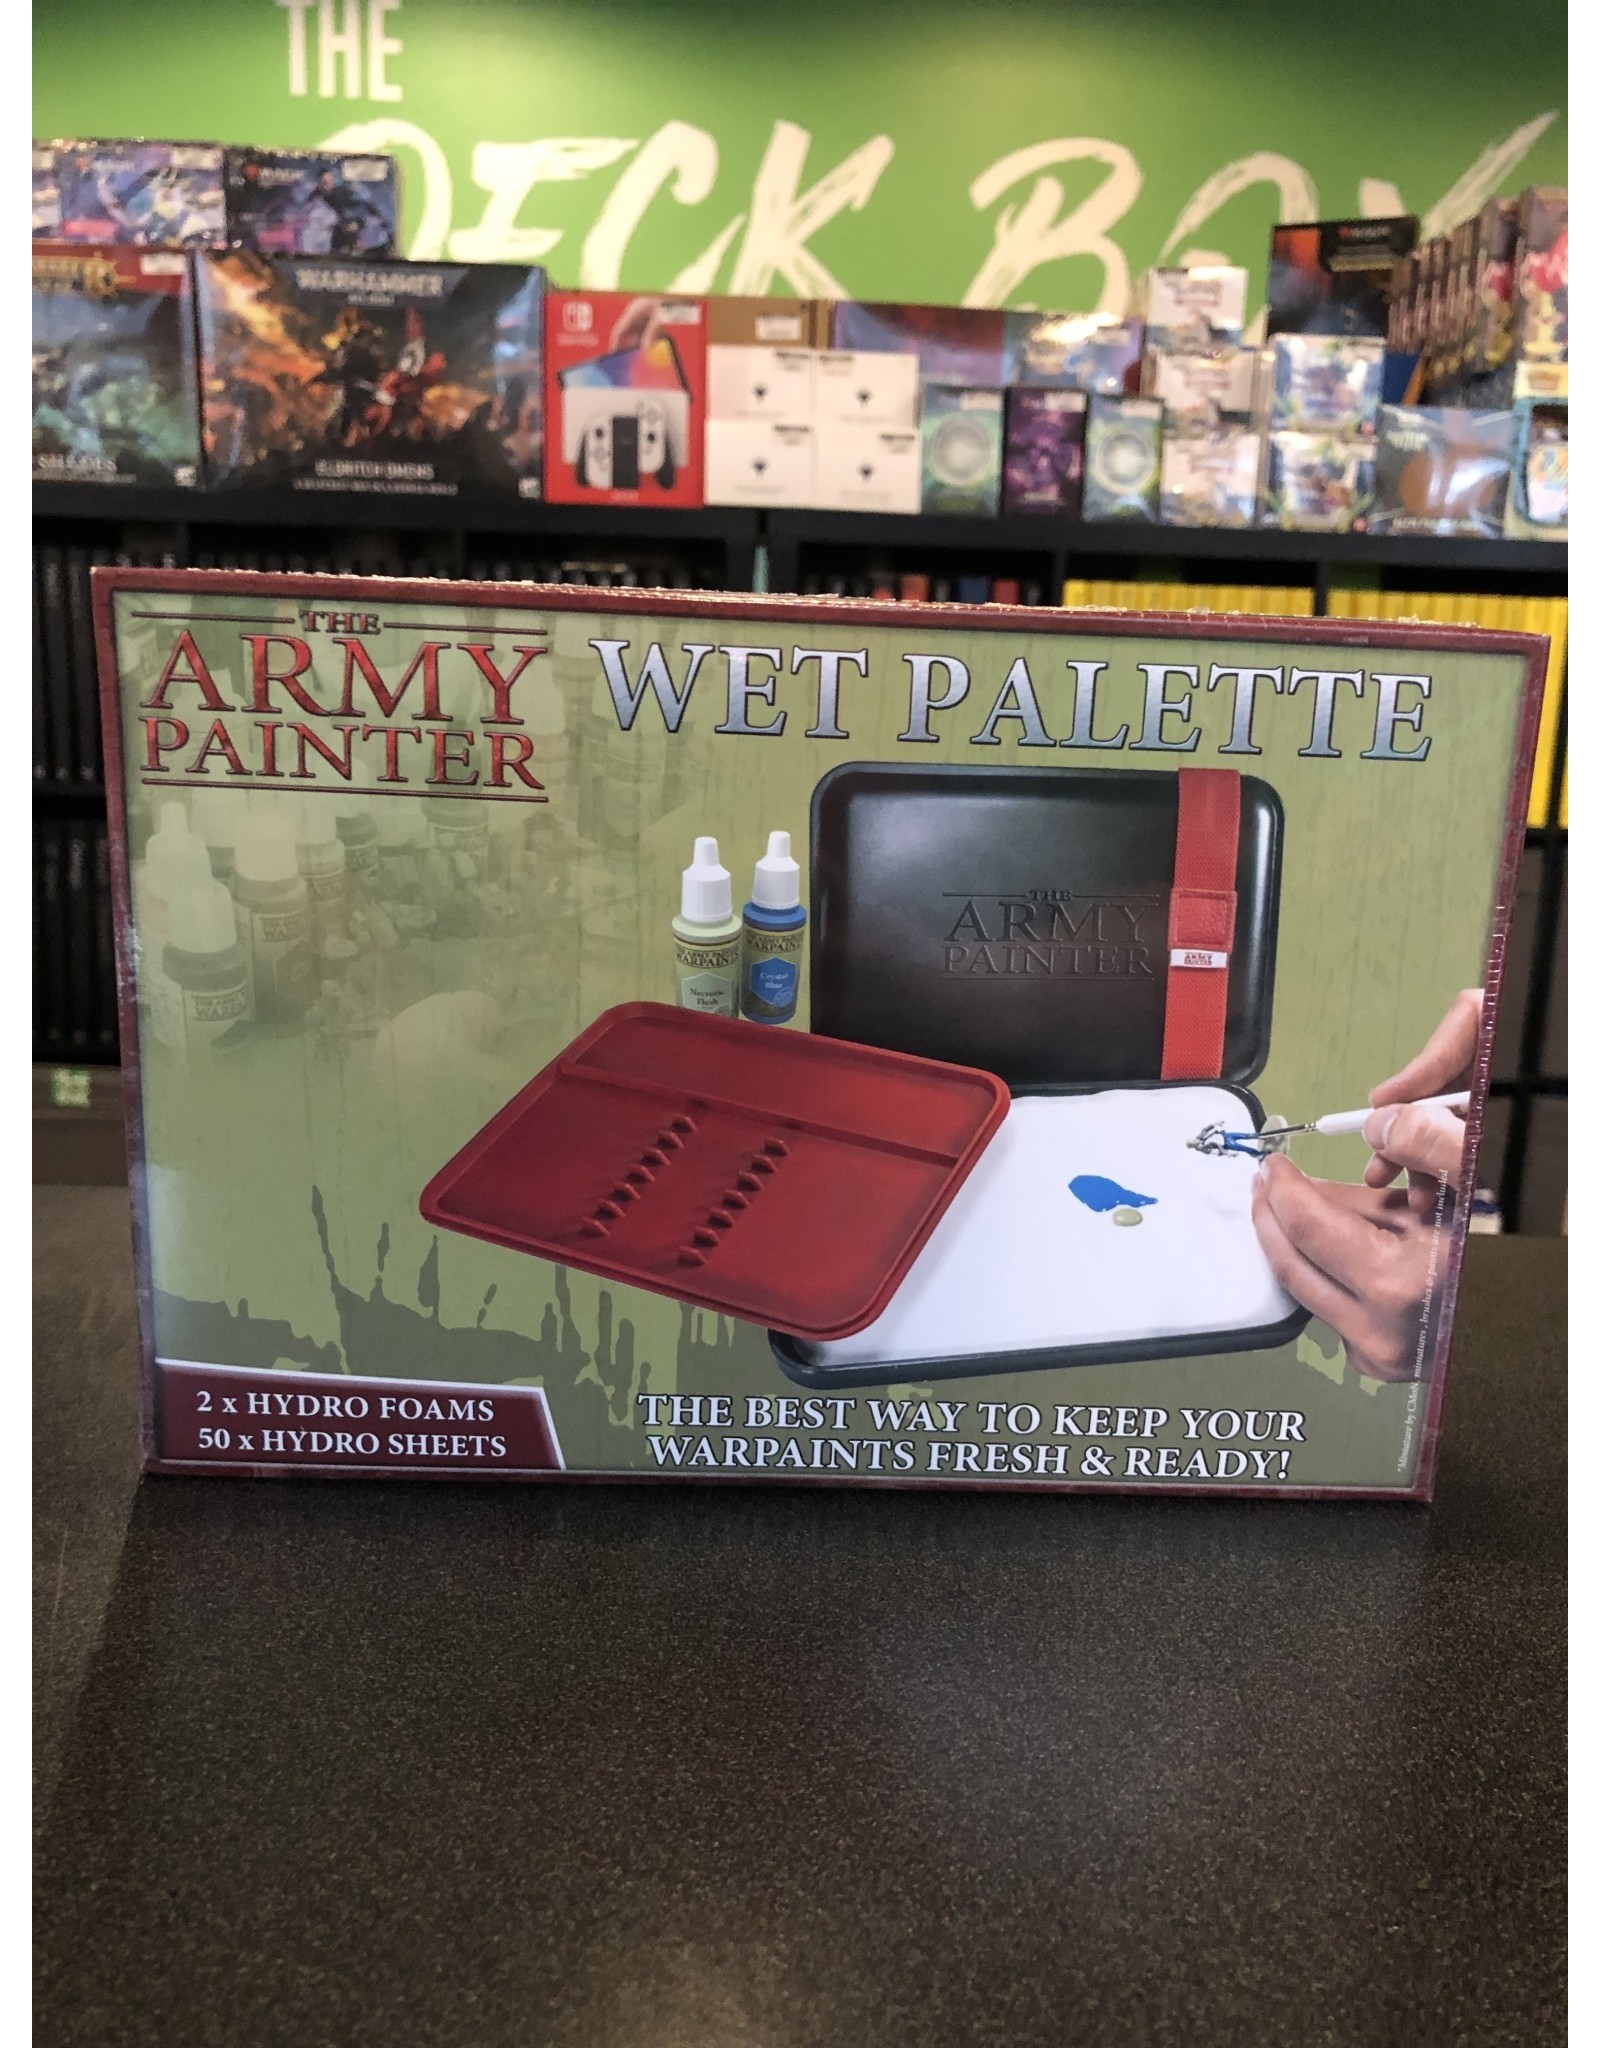 THE ARMY PAINTER WET PALETTE - The Deck Box